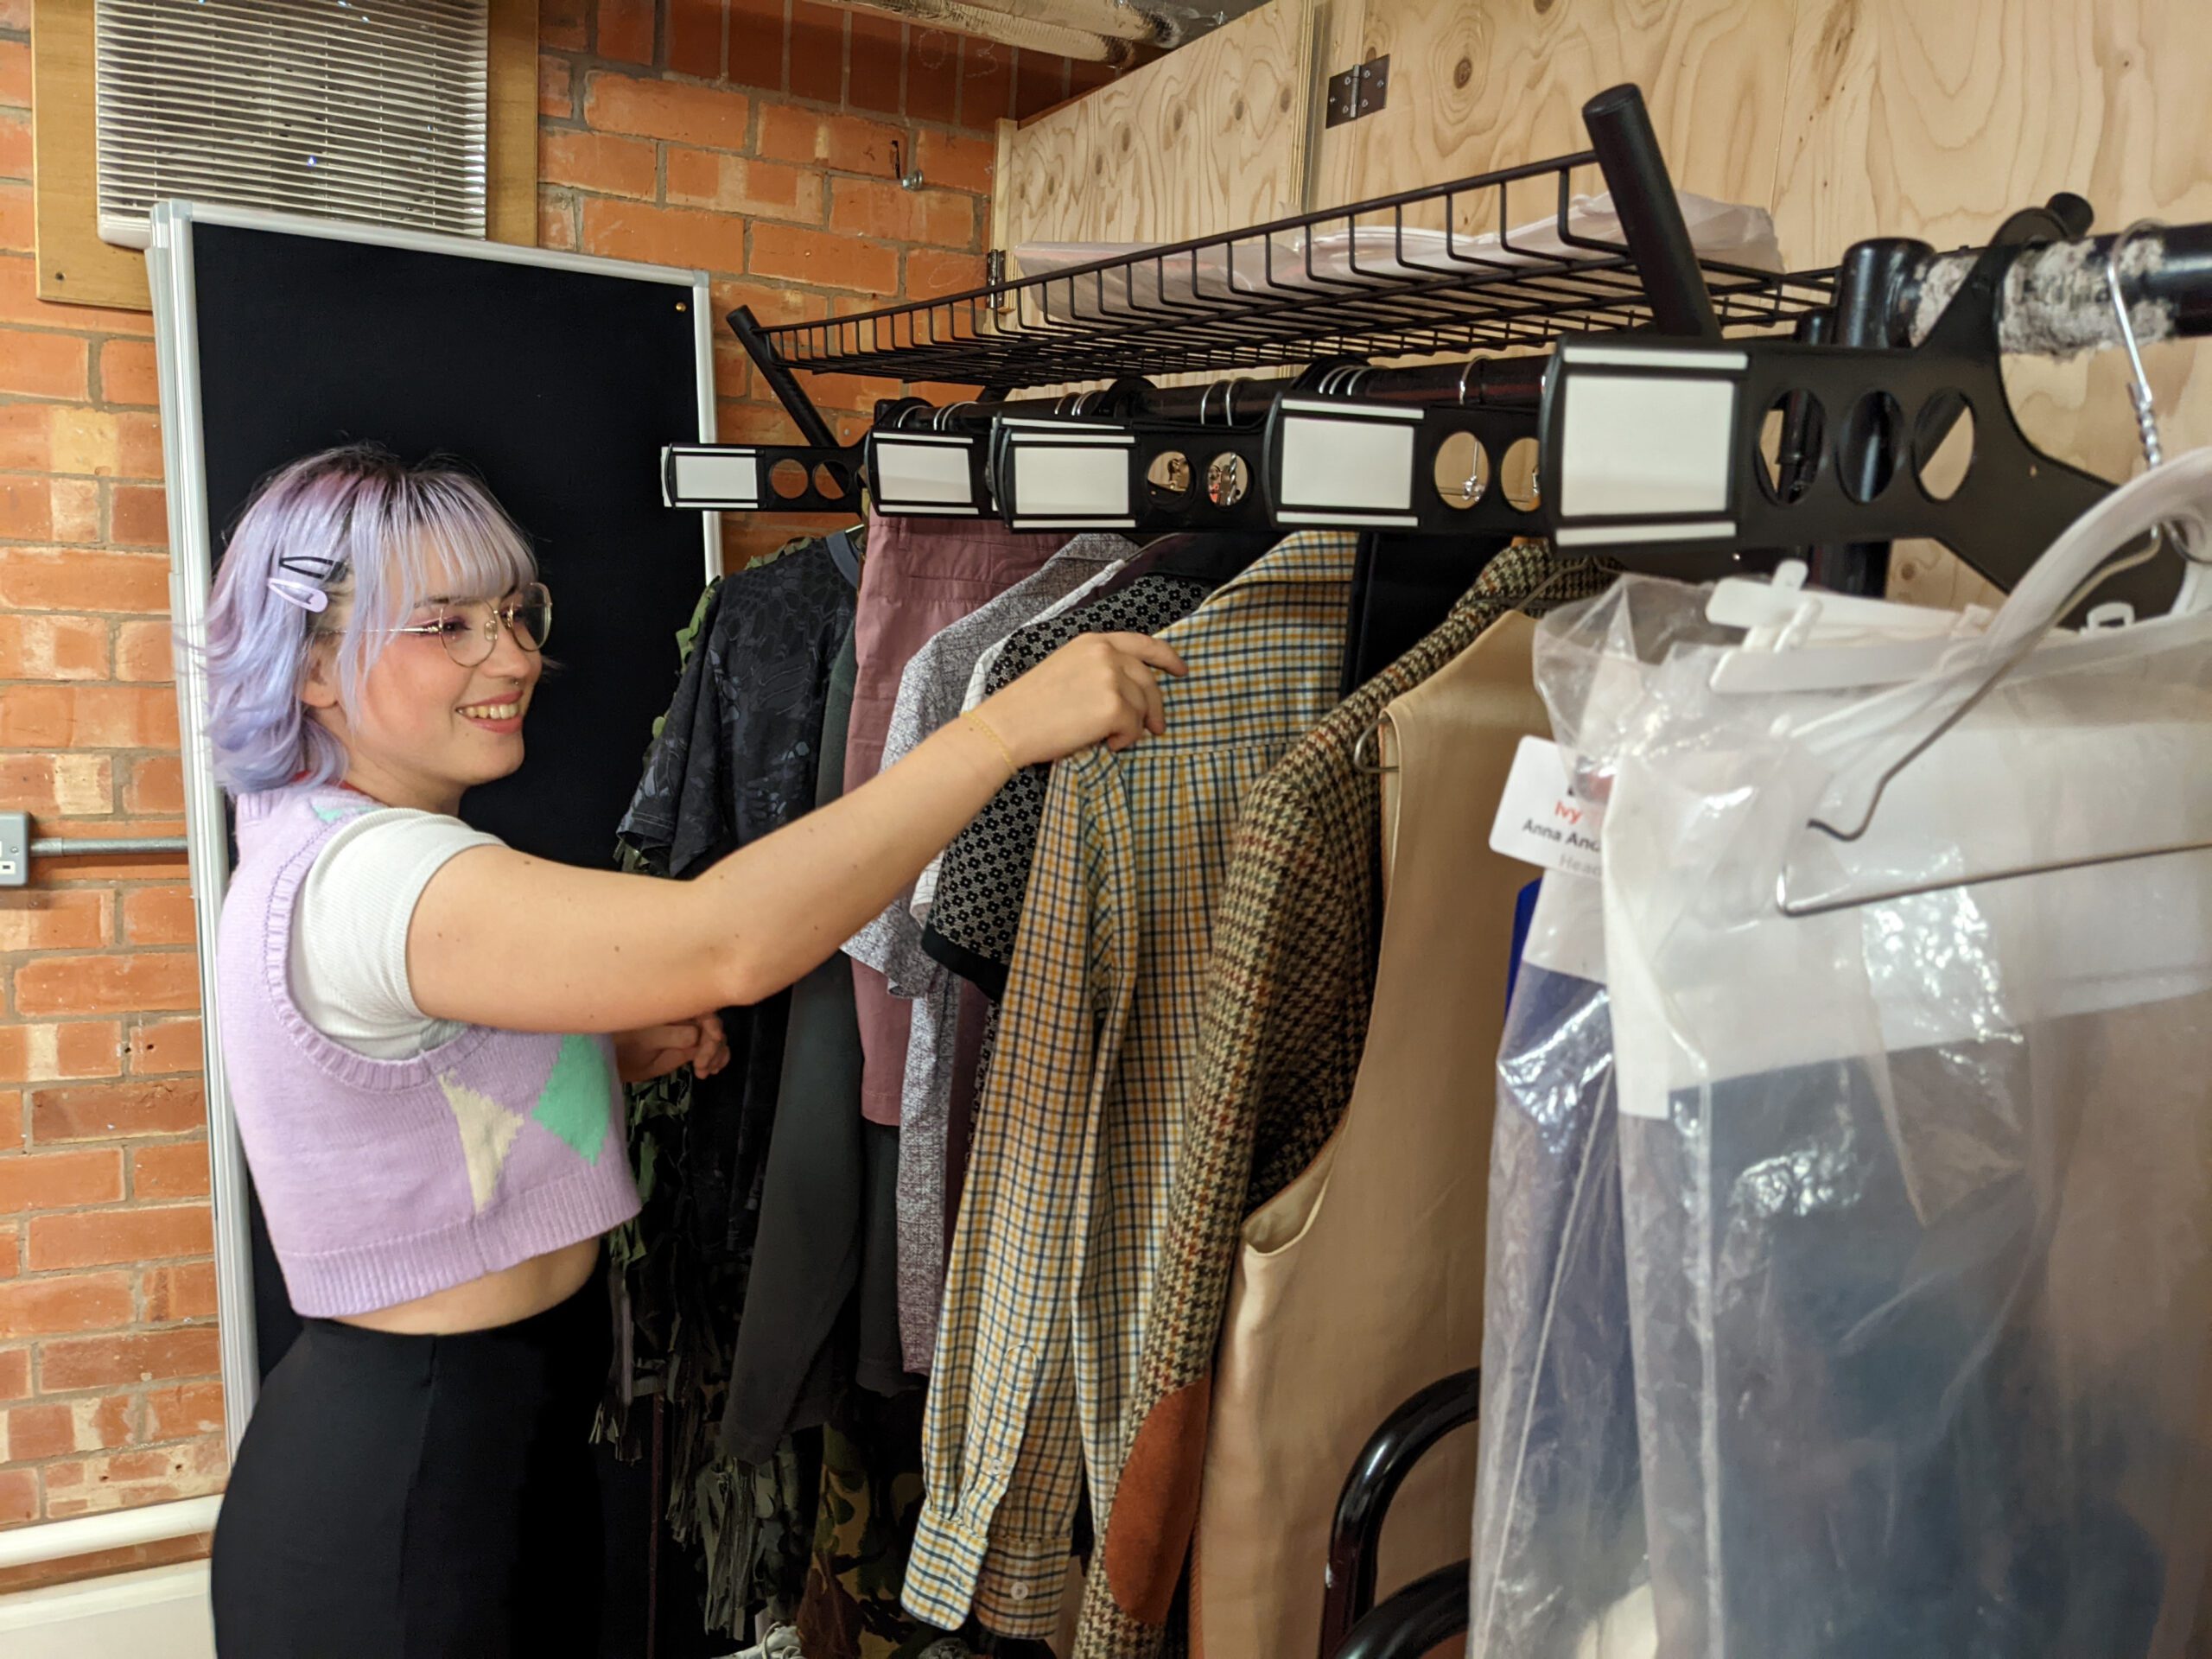 Young woman with purple hair hangs up a costume on a rail backstage at the theatre.